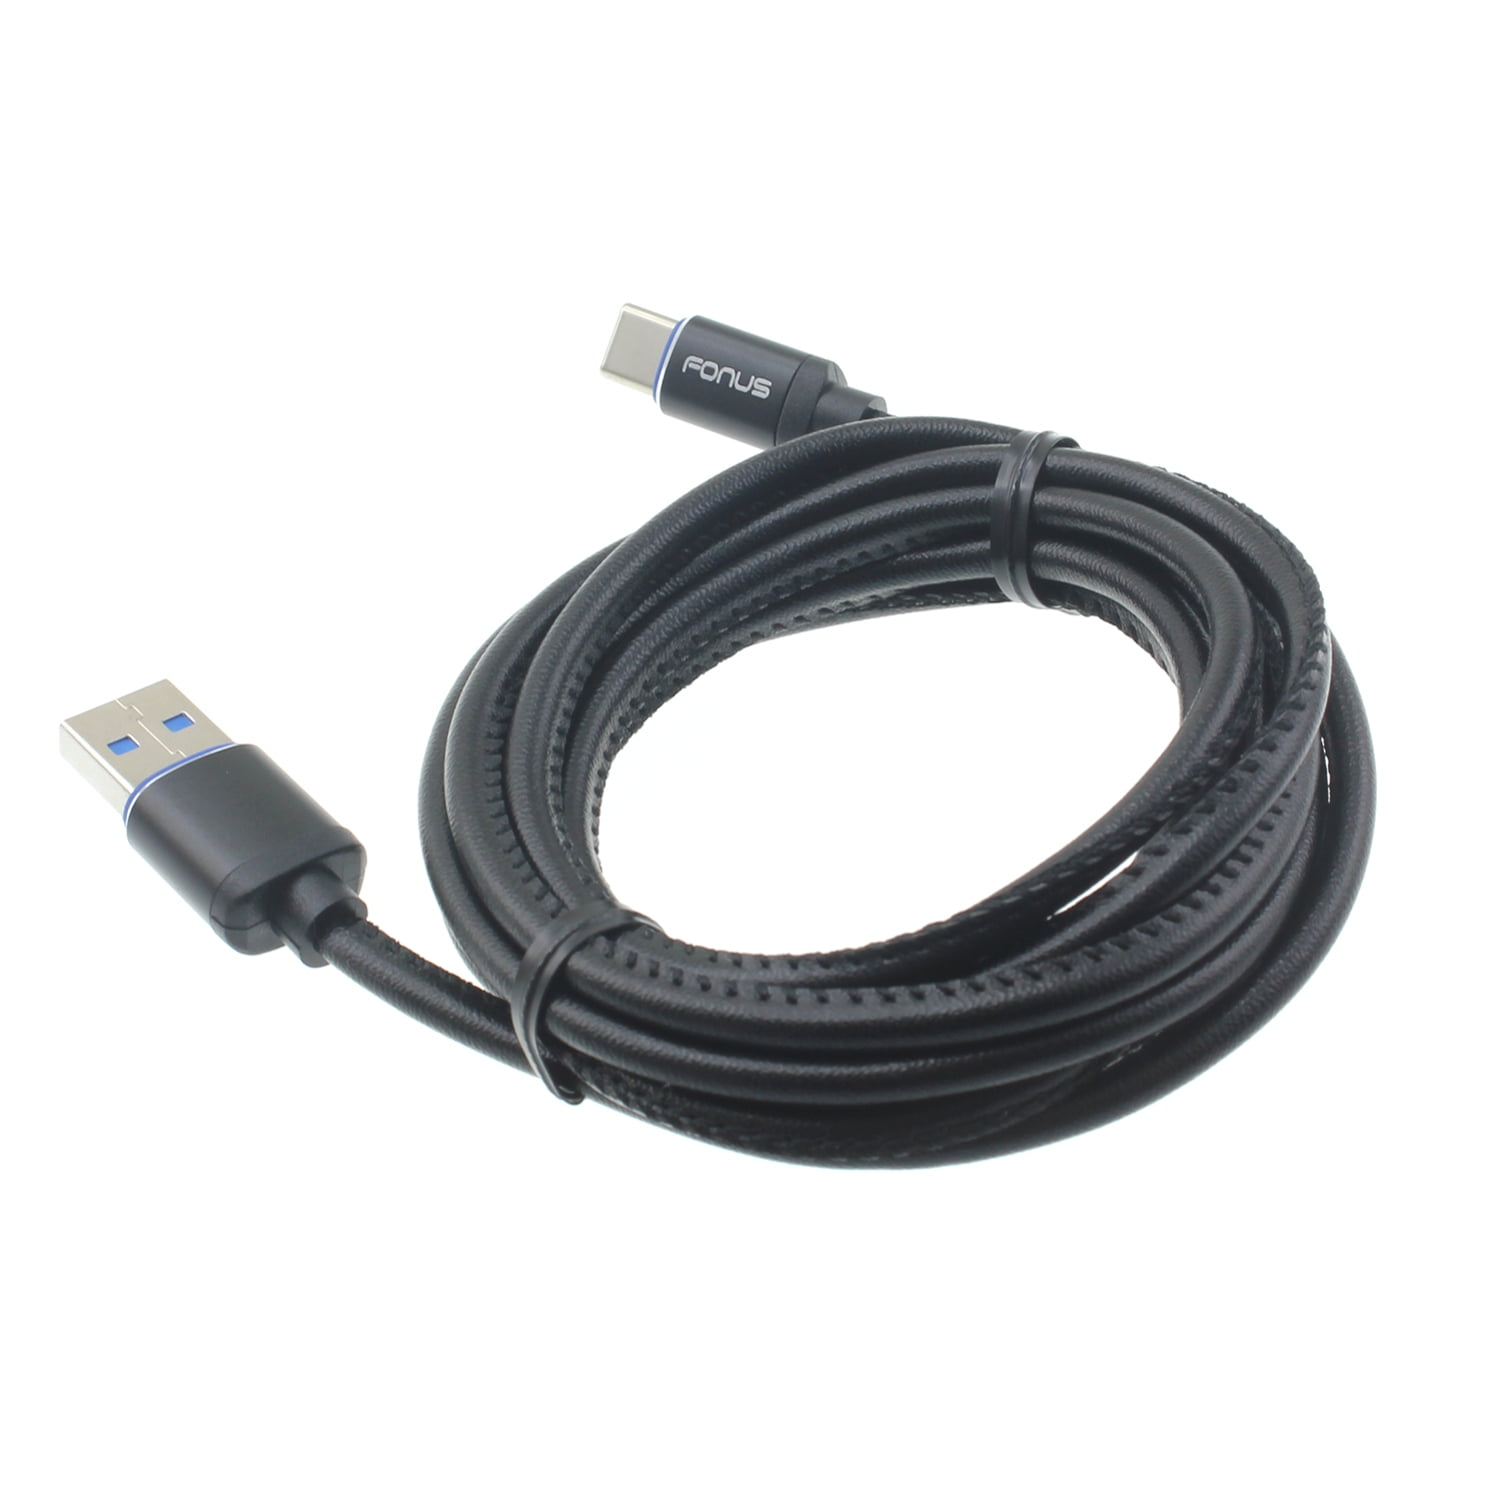 PRO OTG Cable Works for Samsung SM-T280 Right Angle Cable Connects You to Any Compatible USB Device with MicroUSB 